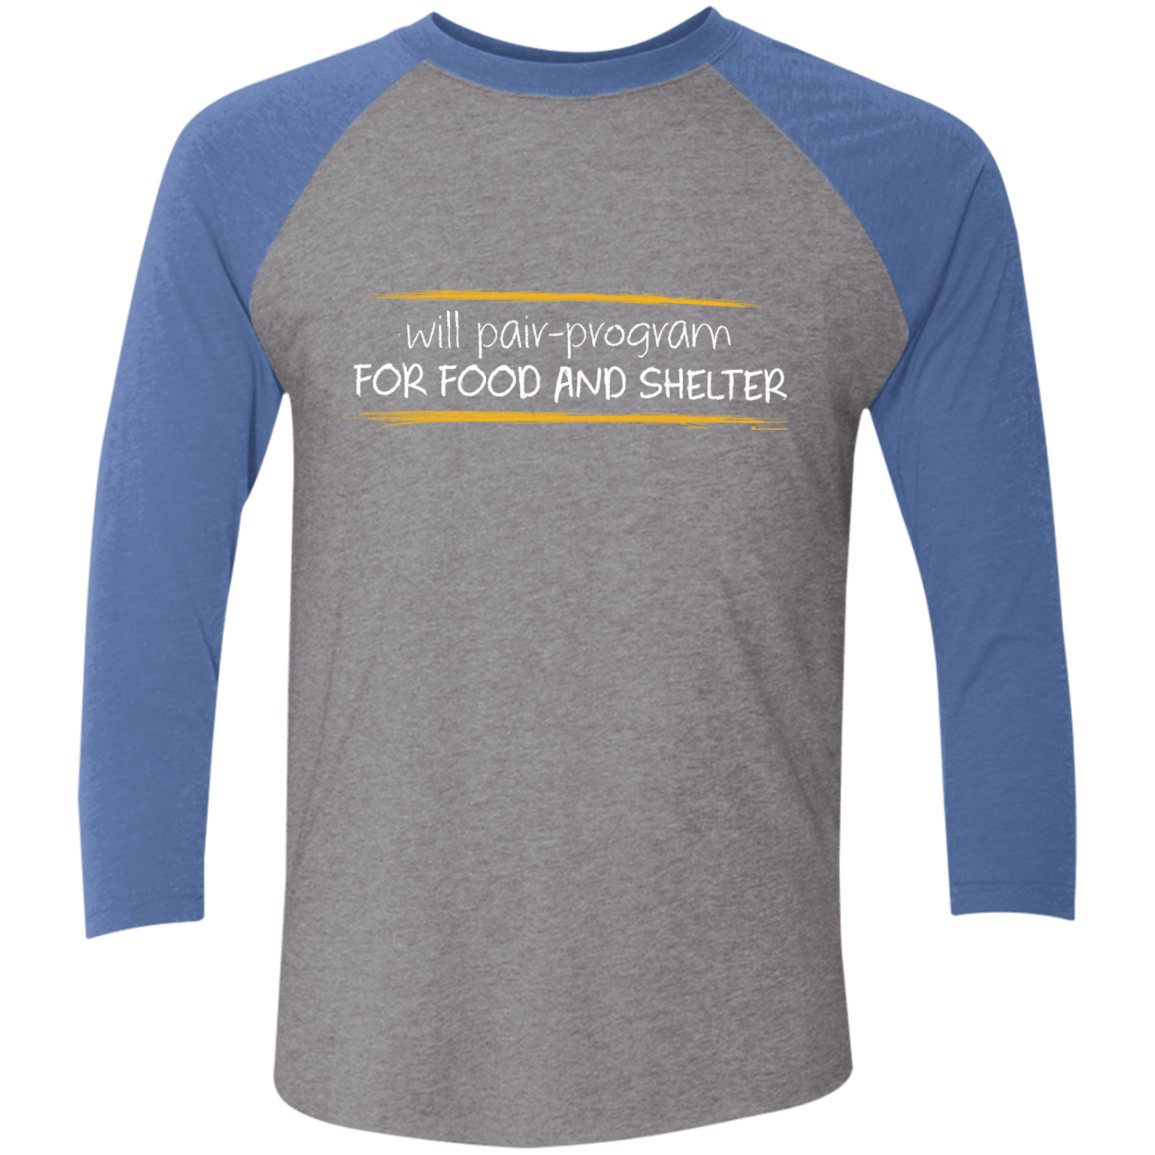 T-Shirts Premium Heather/Vintage Royal / X-Small Pair Programming For Food And Shelter Men's Triblend 3/4 Sleeve